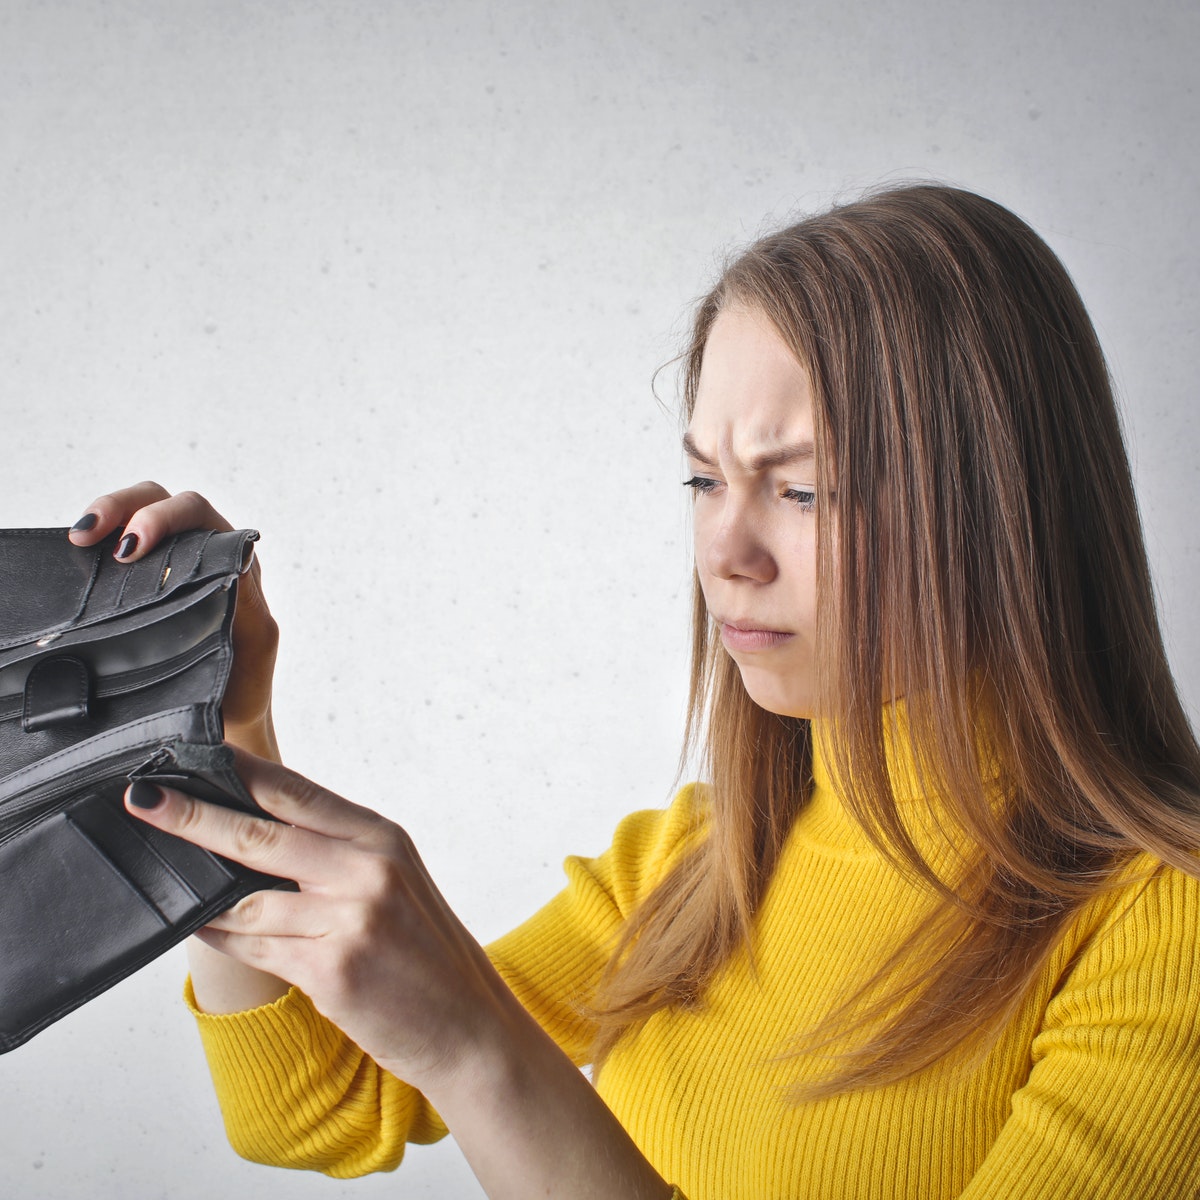 Photo by Andrea Piacquadio: https://www.pexels.com/photo/woman-holding-black-walPhoto by Andrea Piacquadio: https://www.pexels.com/photo/woman-holding-black-wallet-3768145/let-3768145/